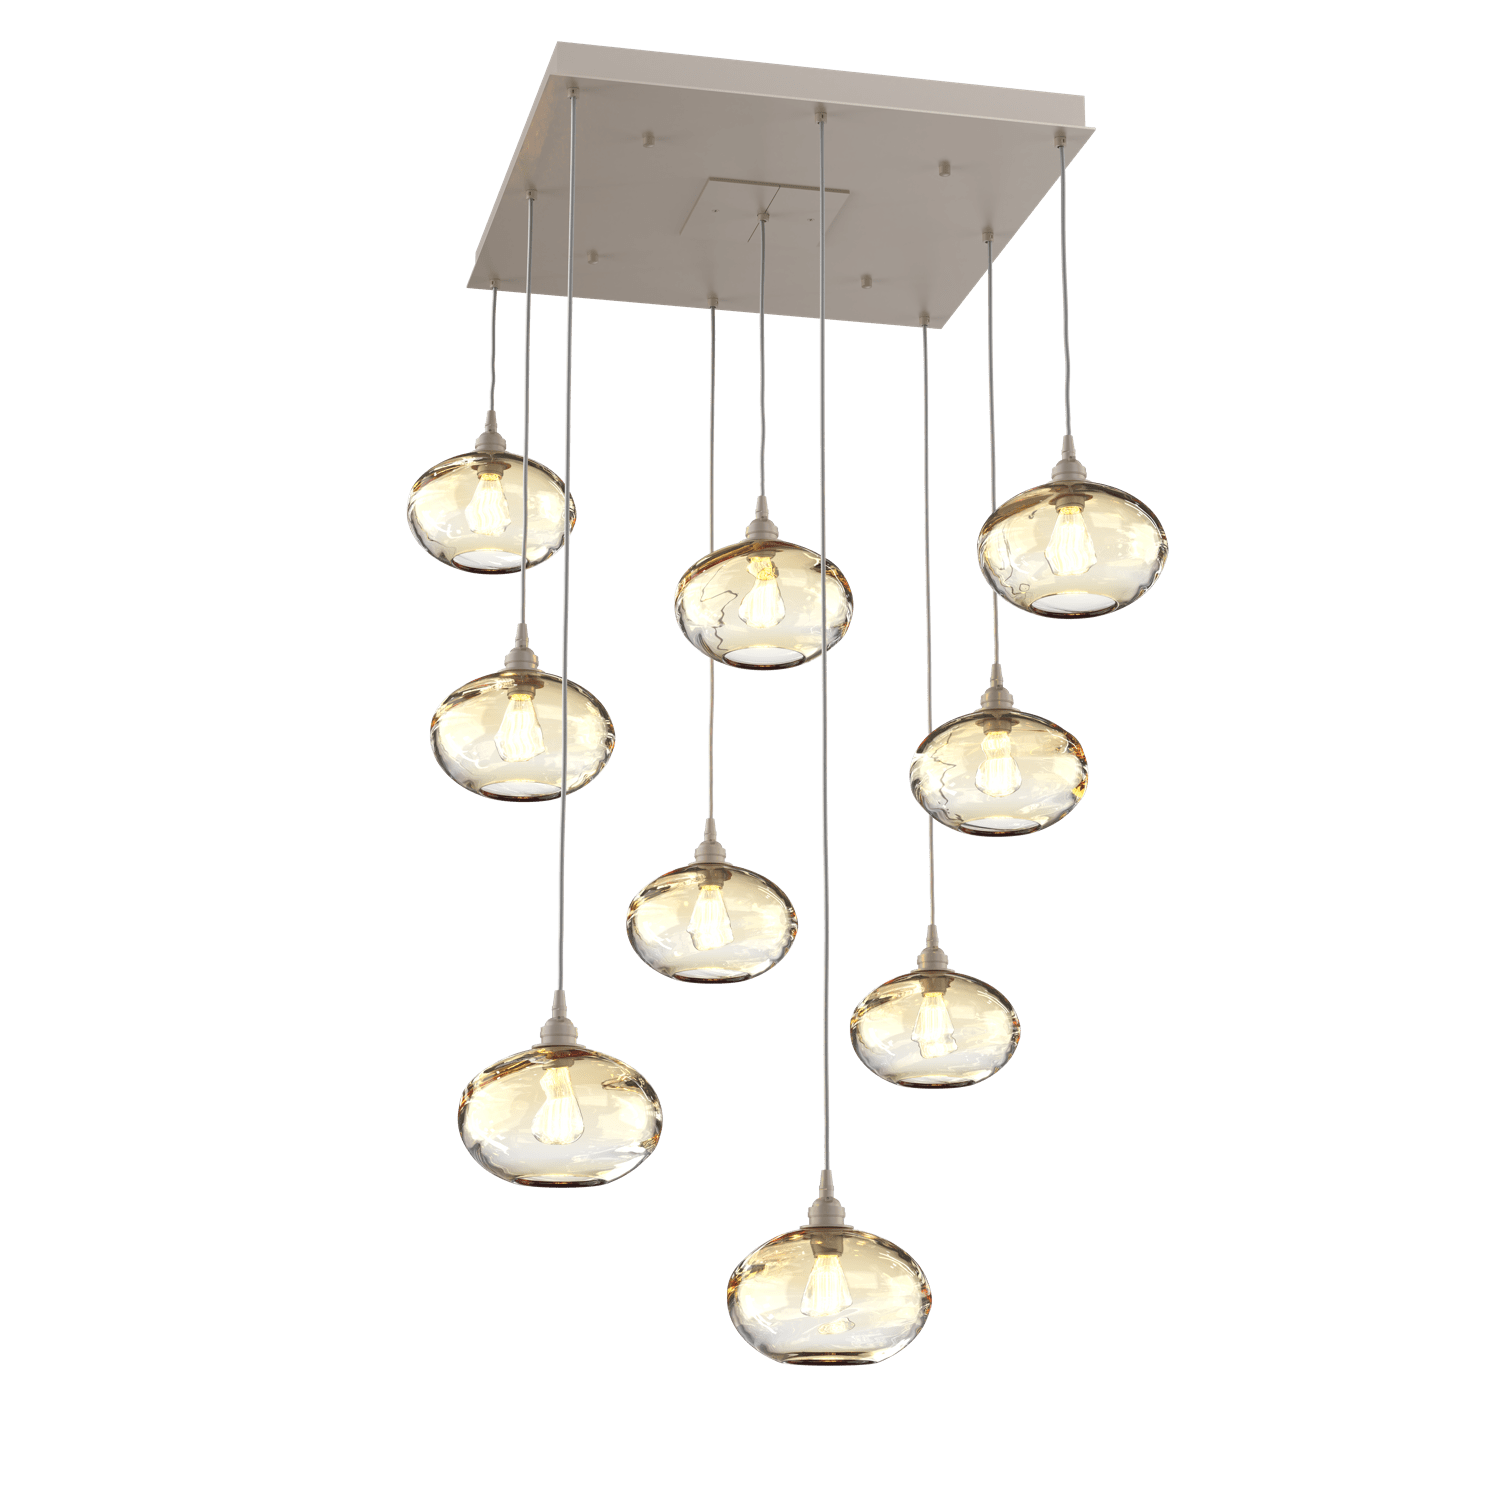 CHB0036-09-BS-OA-Hammerton-Studio-Optic-Blown-Glass-Coppa-9-light-square-pendant-chandelier-with-metallic-beige-silver-finish-and-optic-amber-blown-glass-shades-and-incandescent-lamping